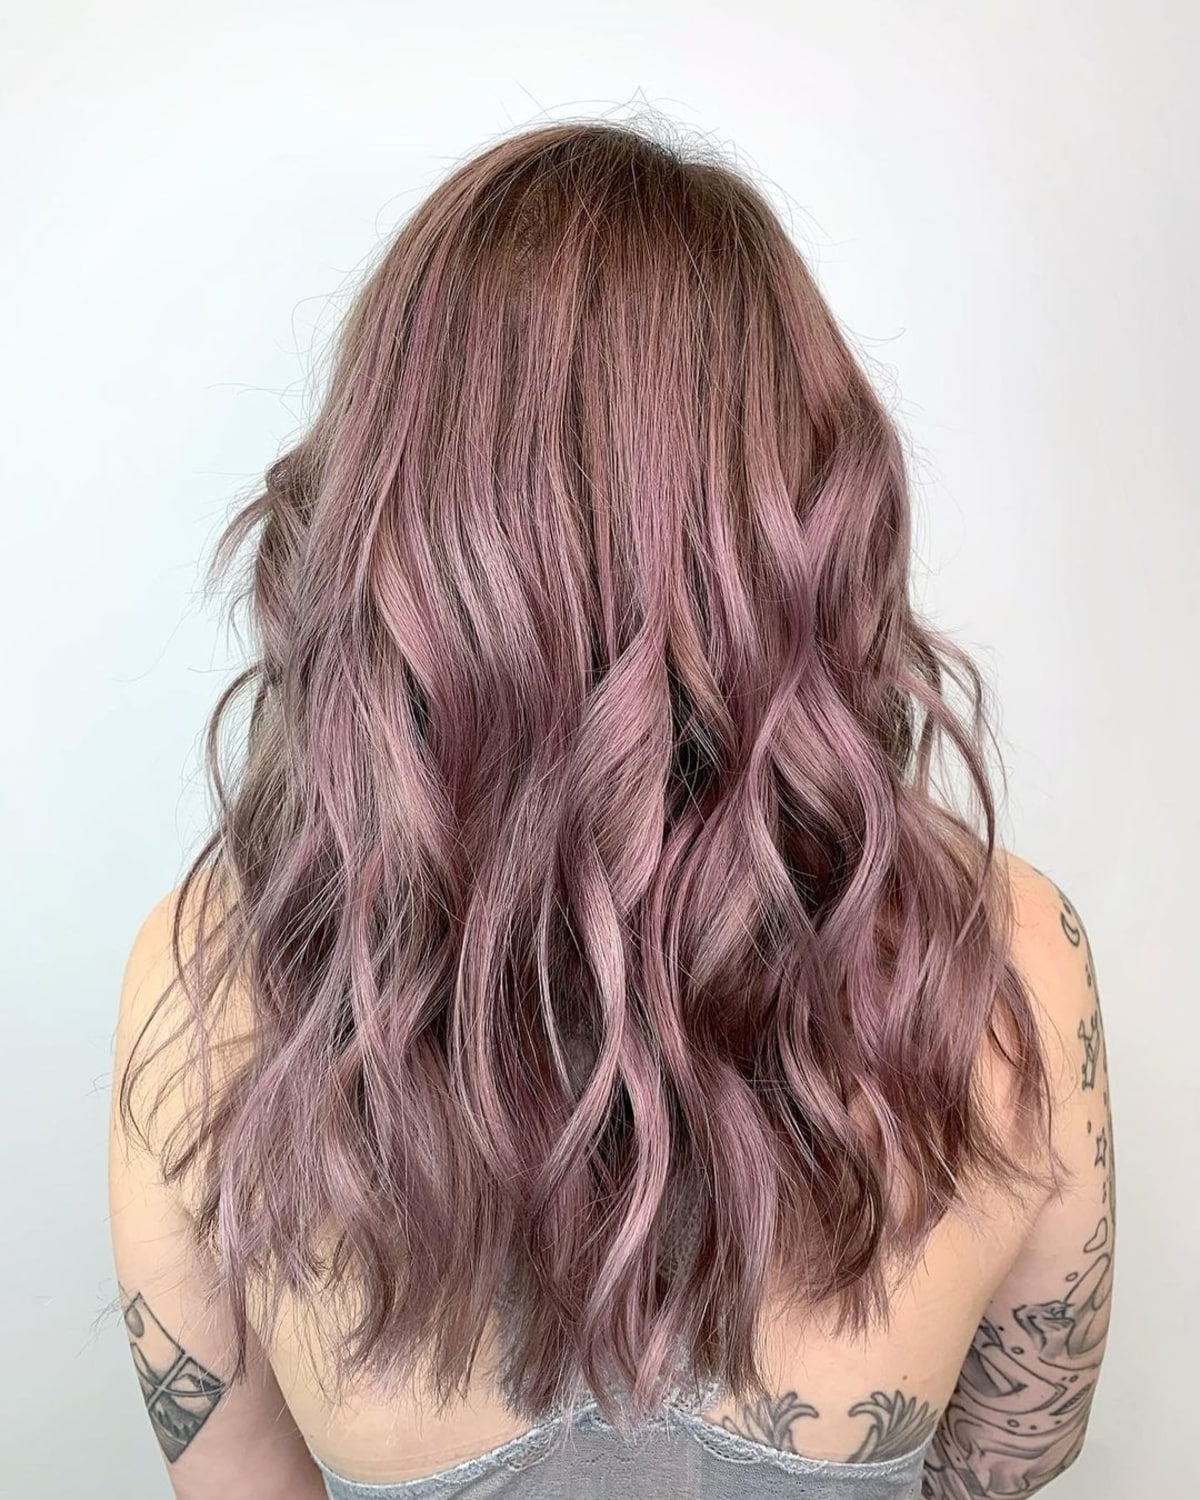 These 26 Plum Hair Color Ideas are Totally Trending Right Now